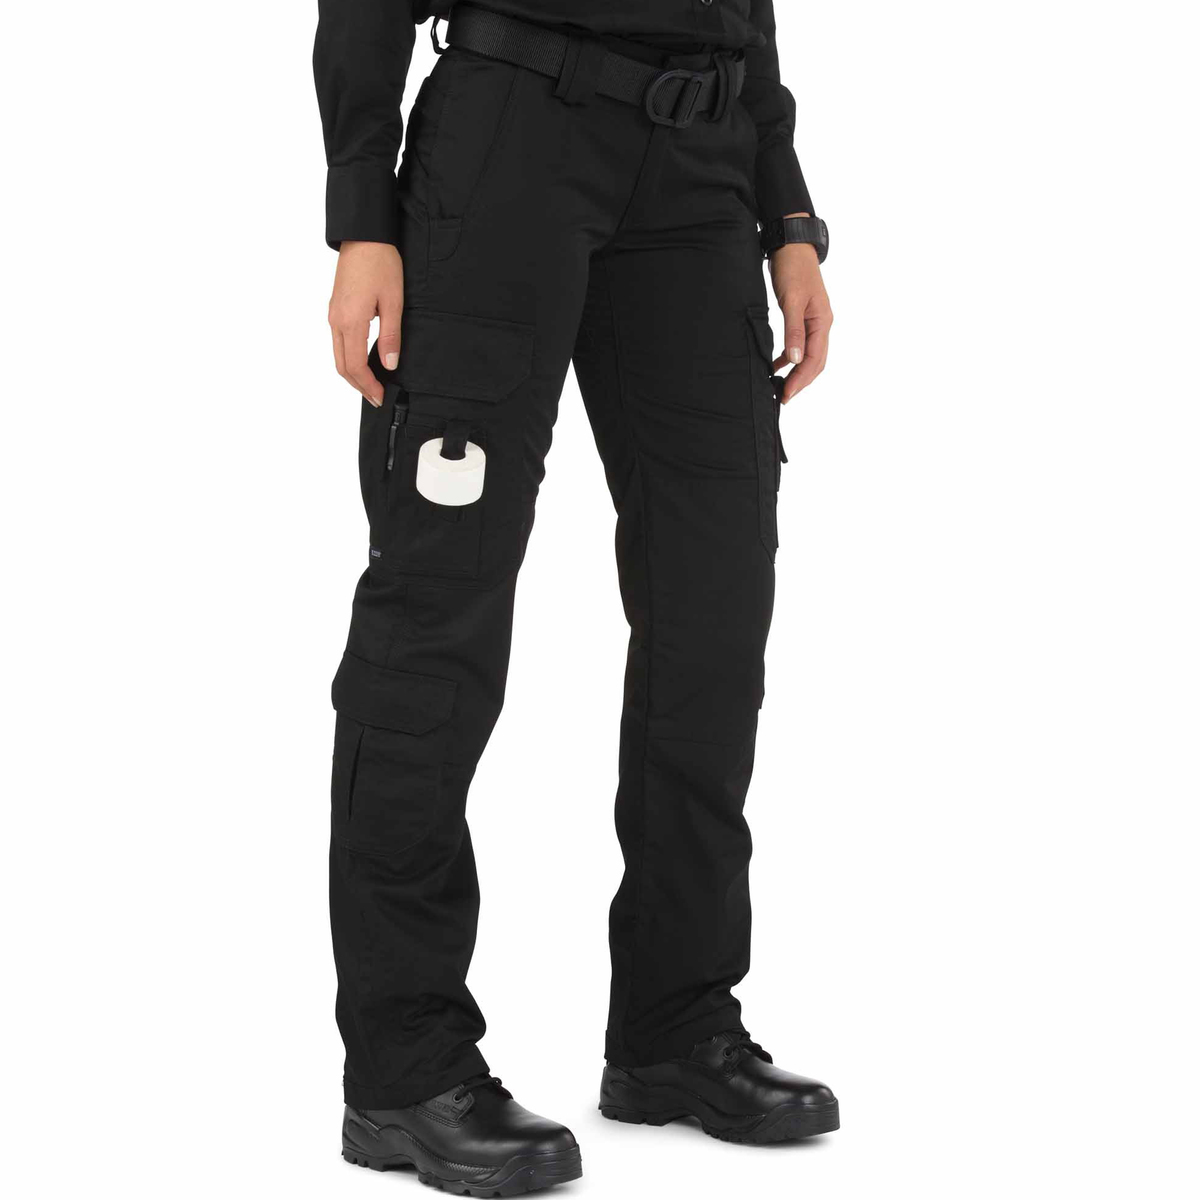 Style 64301 Poly-Cotton Twill Fabric 5.11 Tactical Womens EMS Uniform Work Pants